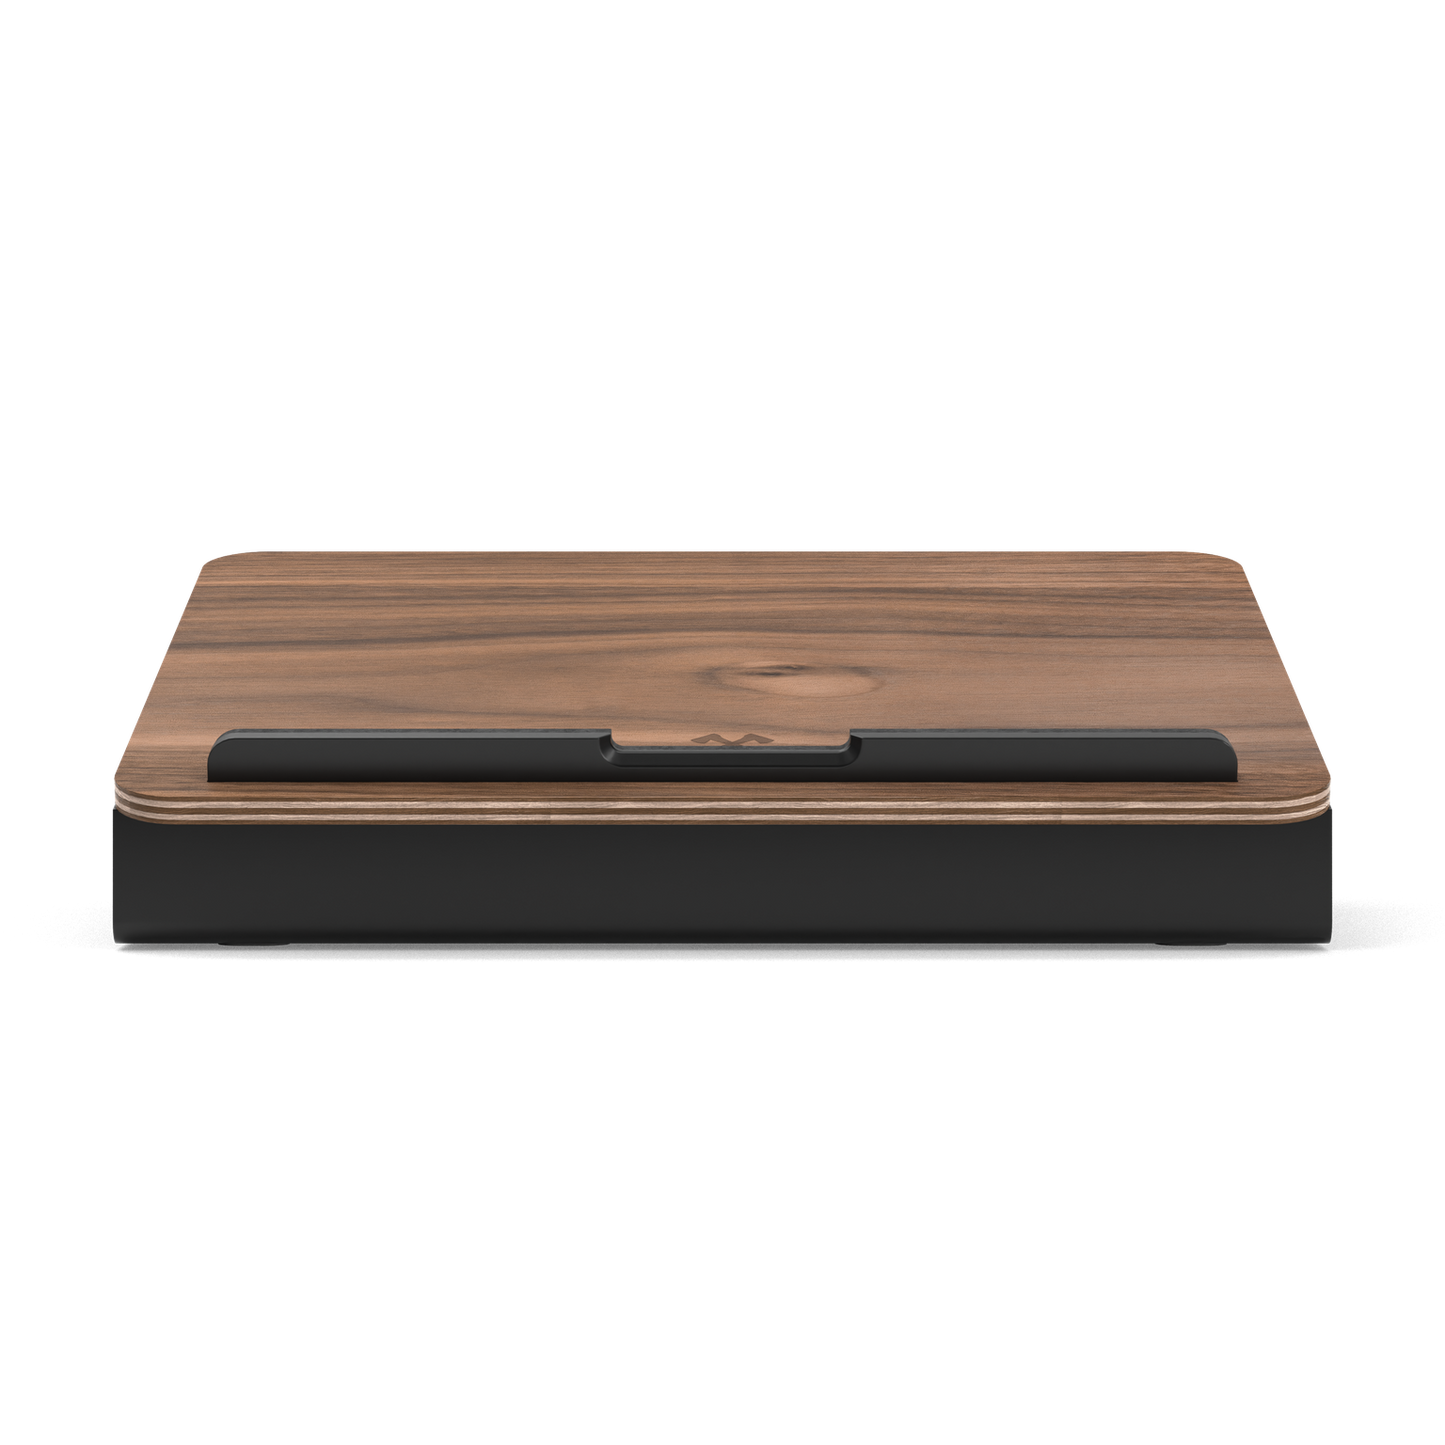 Woodcessories Laptop Stand Holz